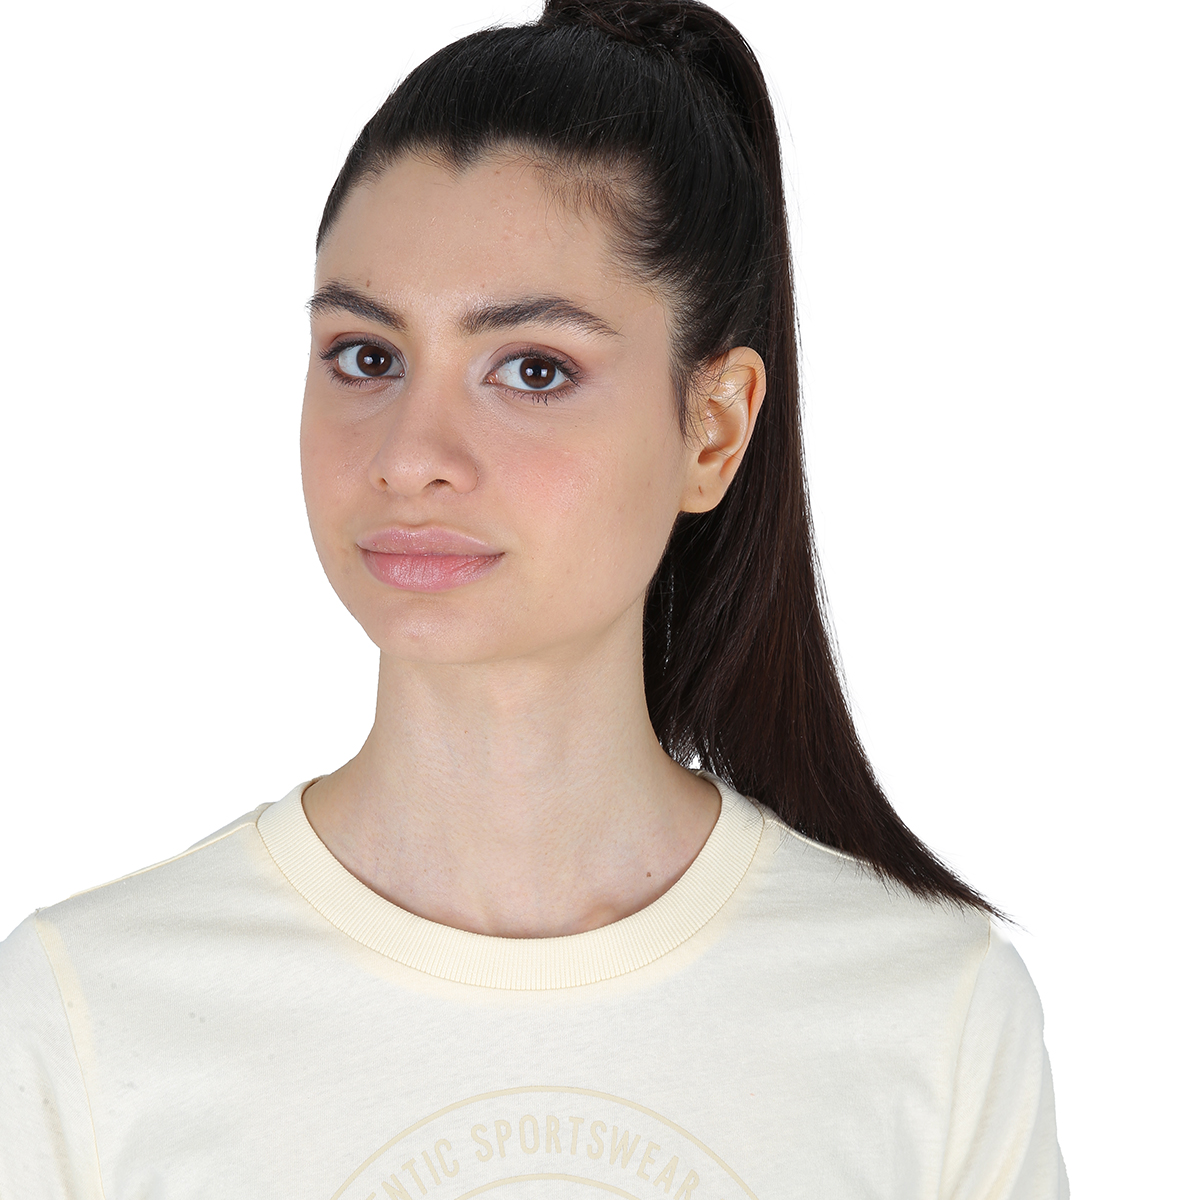 Remera Kappa Authentic Truks Mujer,  image number null